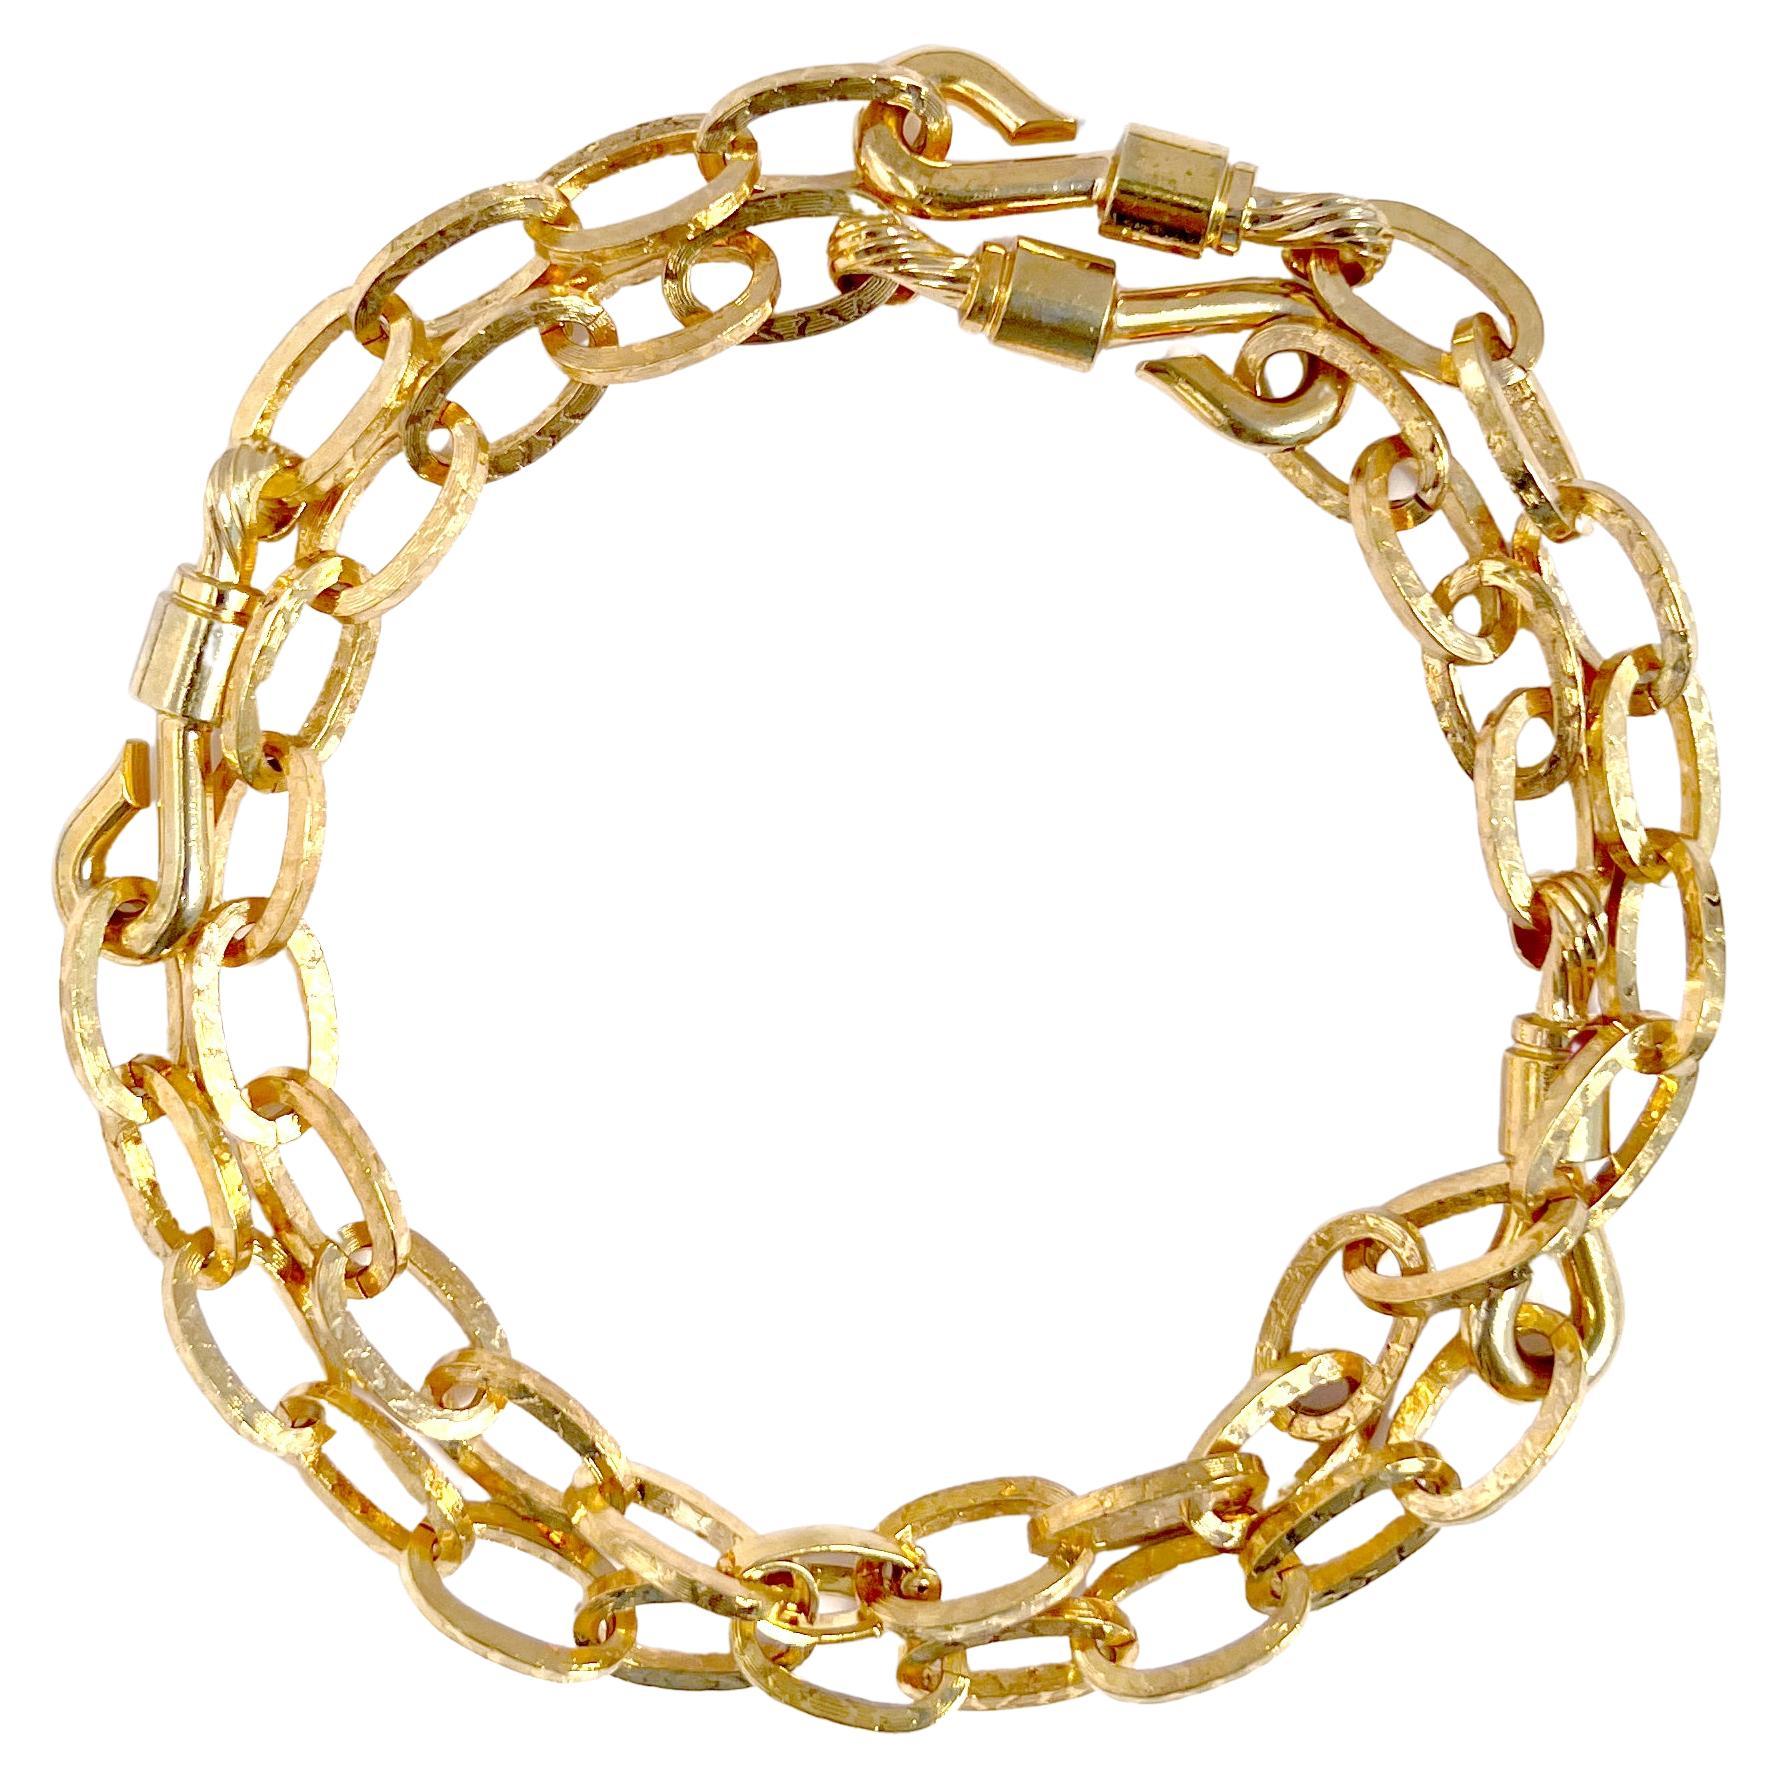 Vintage Christian Dior Long Chain Necklace with Hook Details, 1972 For Sale